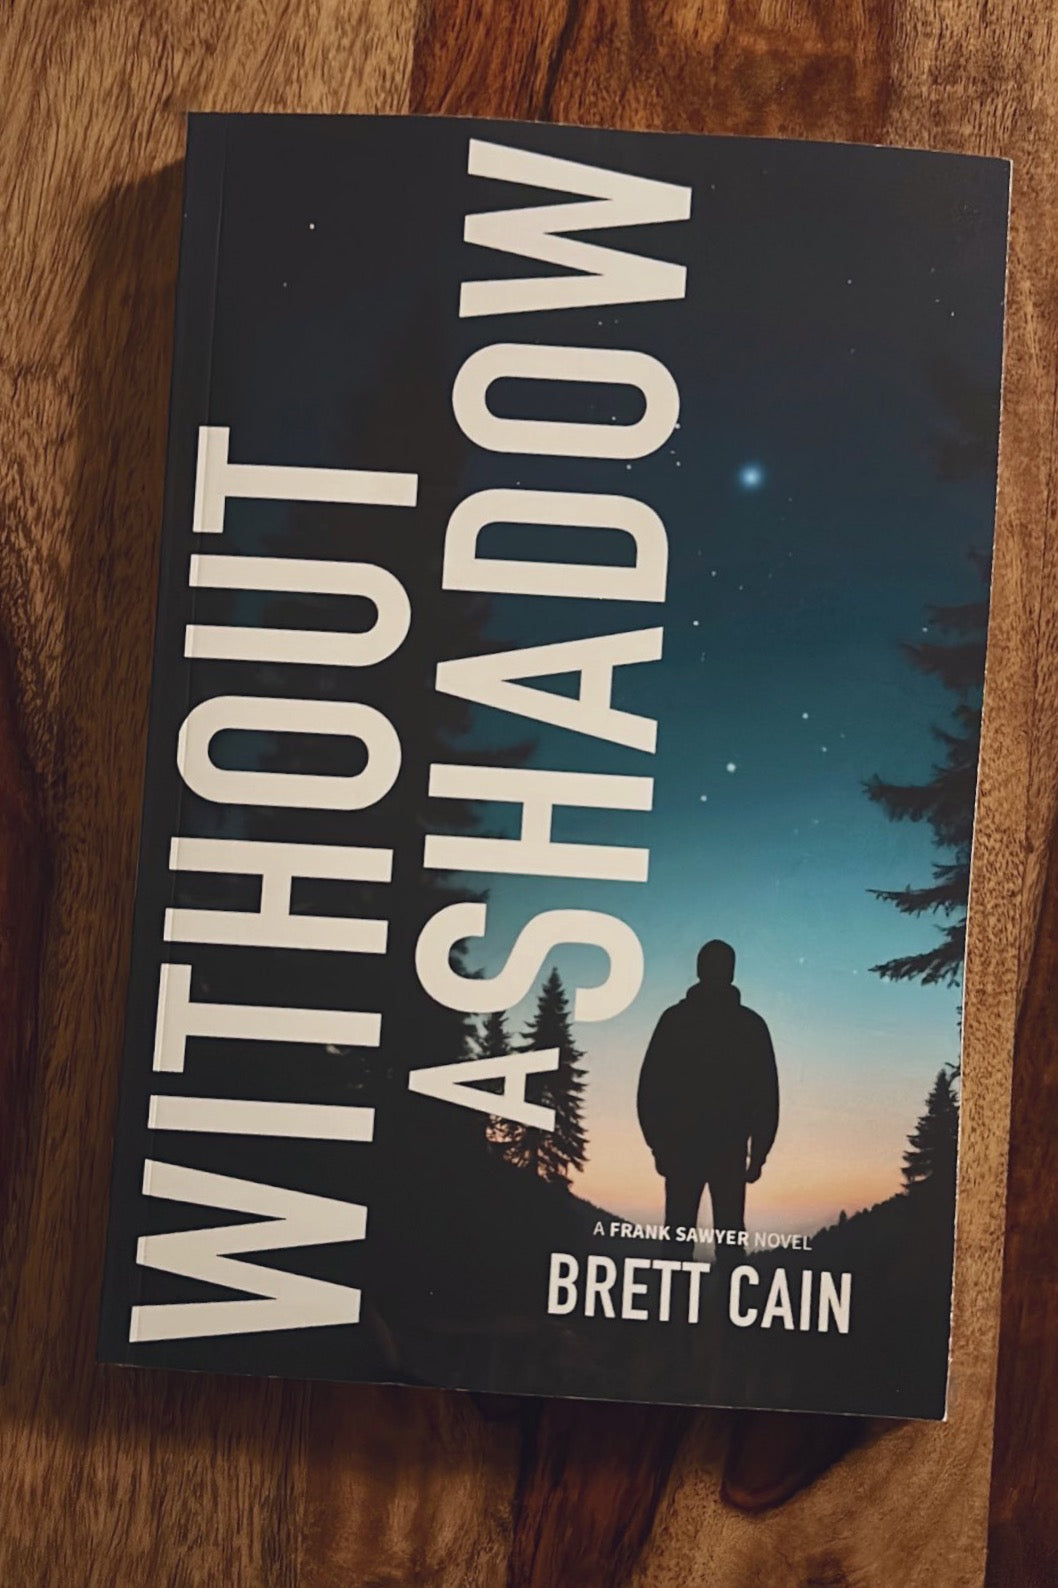 Without A Shadow – A Frank Sawyer suspense novel by Brett Cain